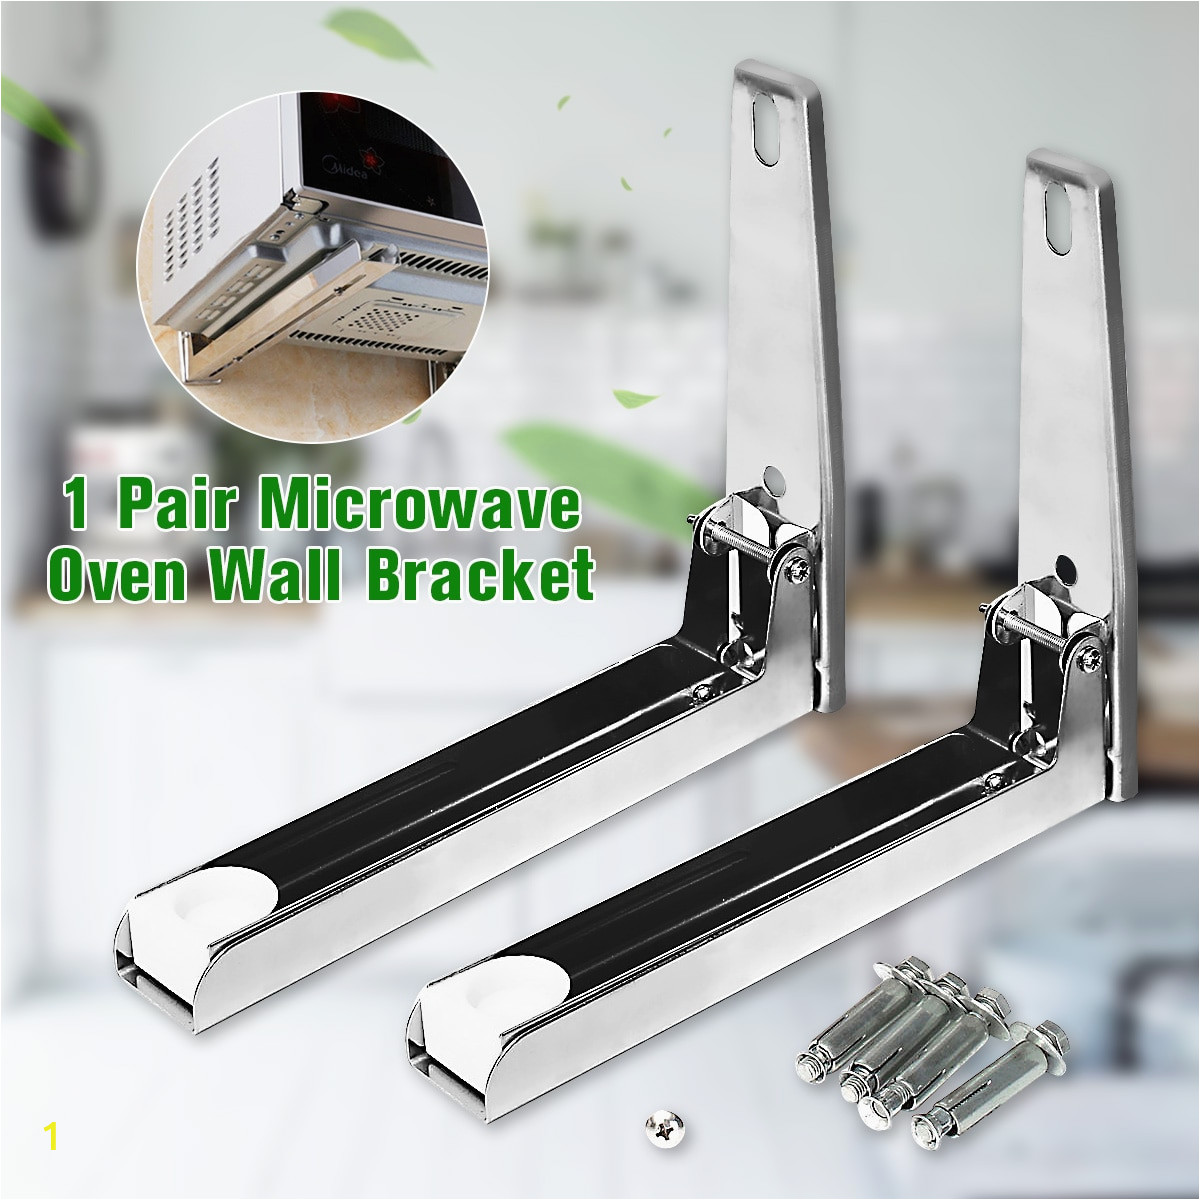 Support Mural Tv Wall Mount Us $16 01 Off Mtgather Stainless Support Frame Steel Foldable Stretch Shelf Rack Microwave Oven Wall Mount Bracket In Brackets From Home